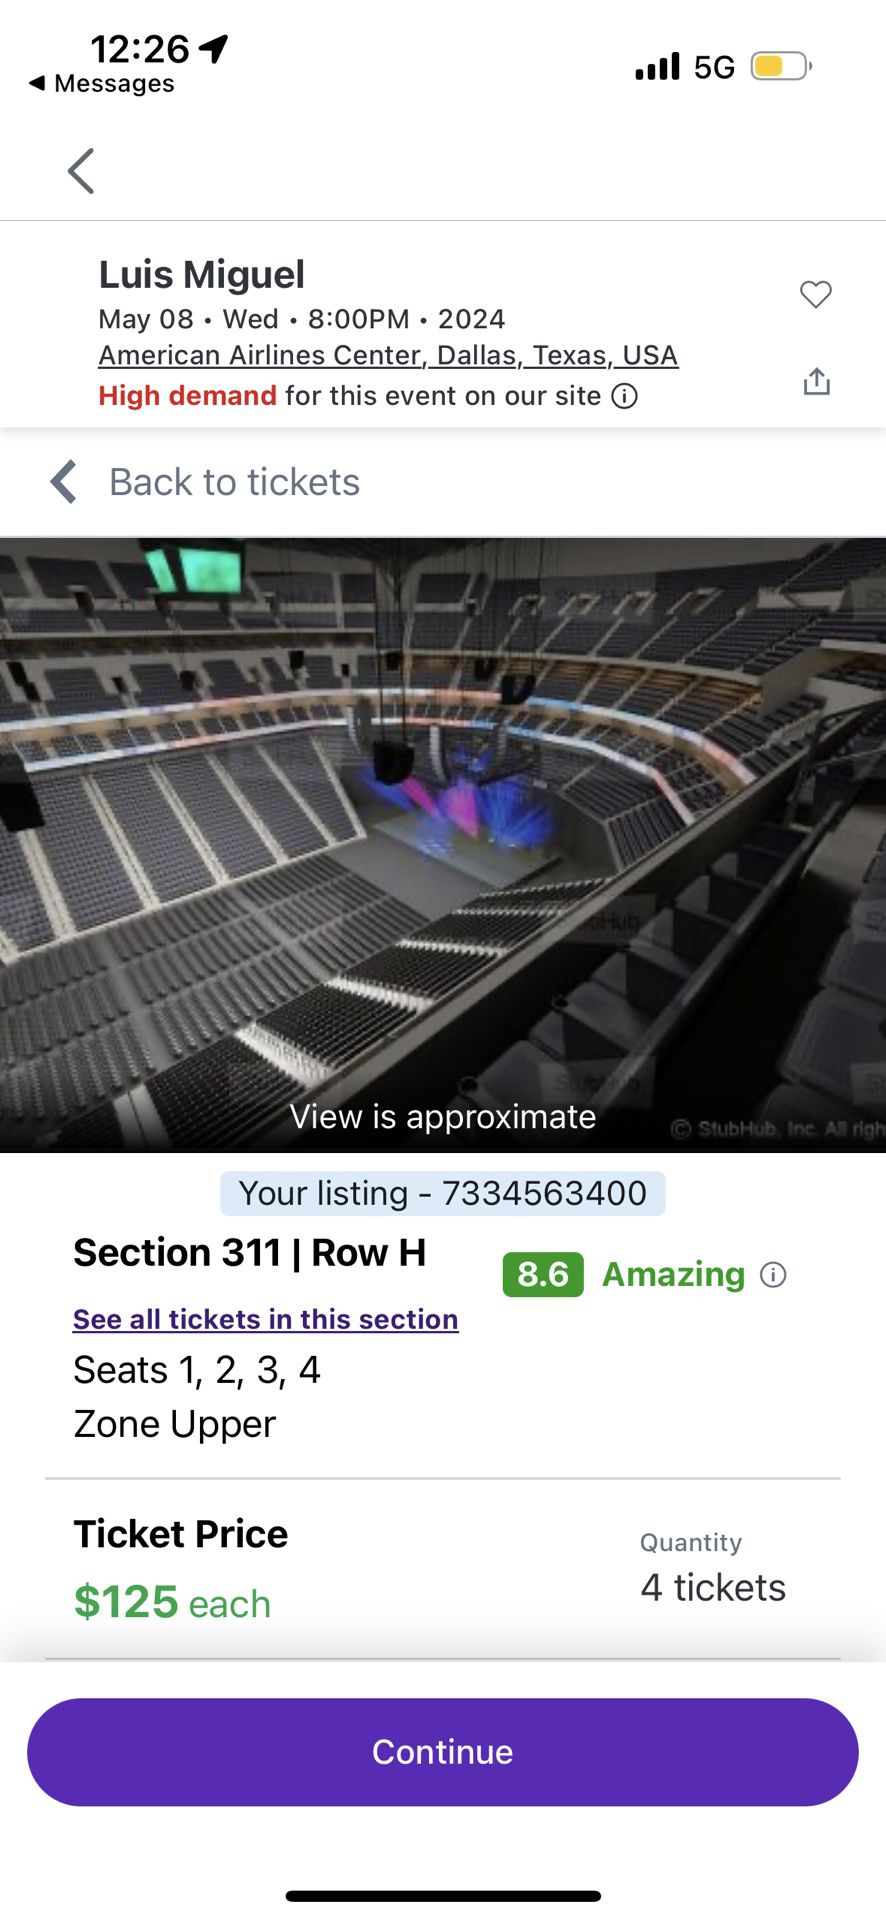 Luis Miguel - 2 Tickets On Aisle